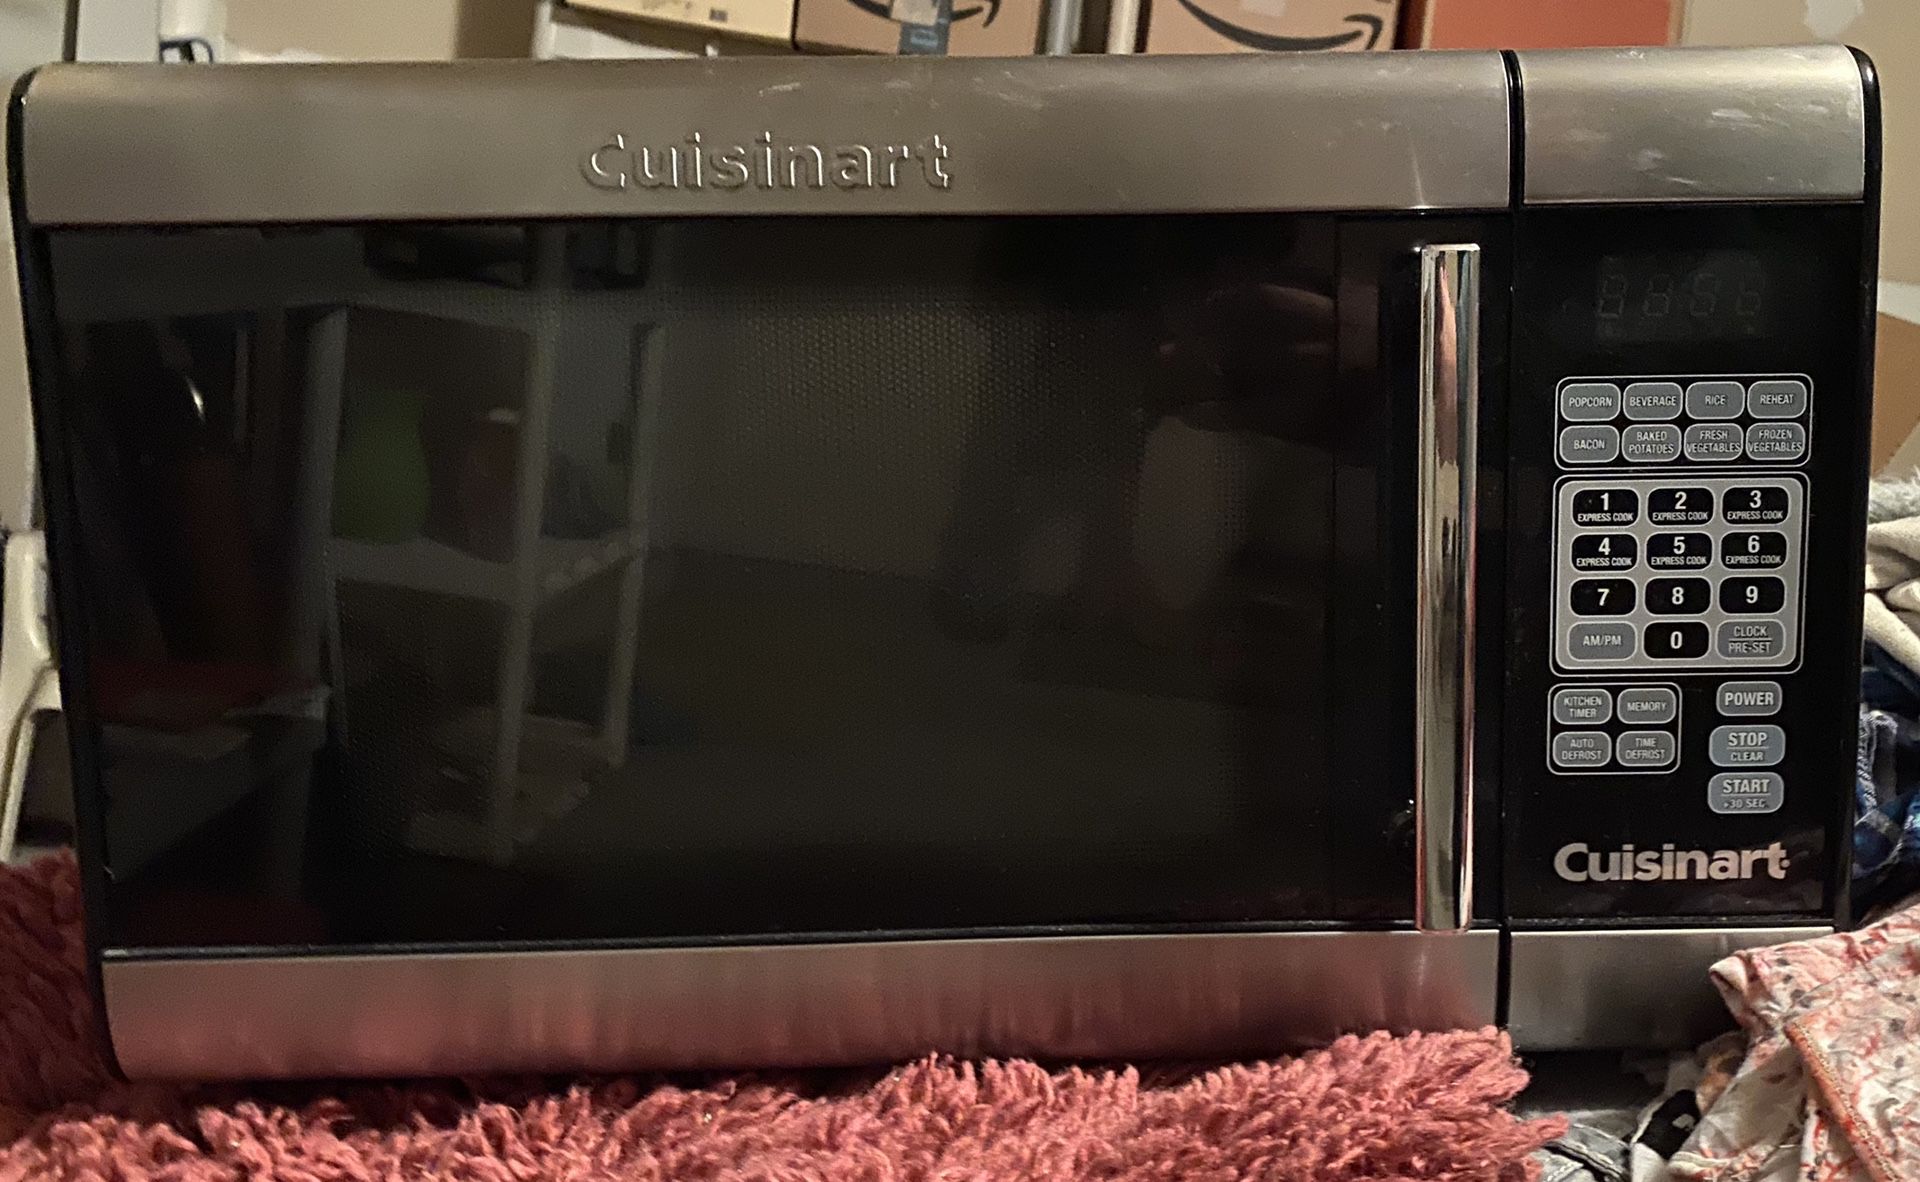 Cuisinart counter microwave